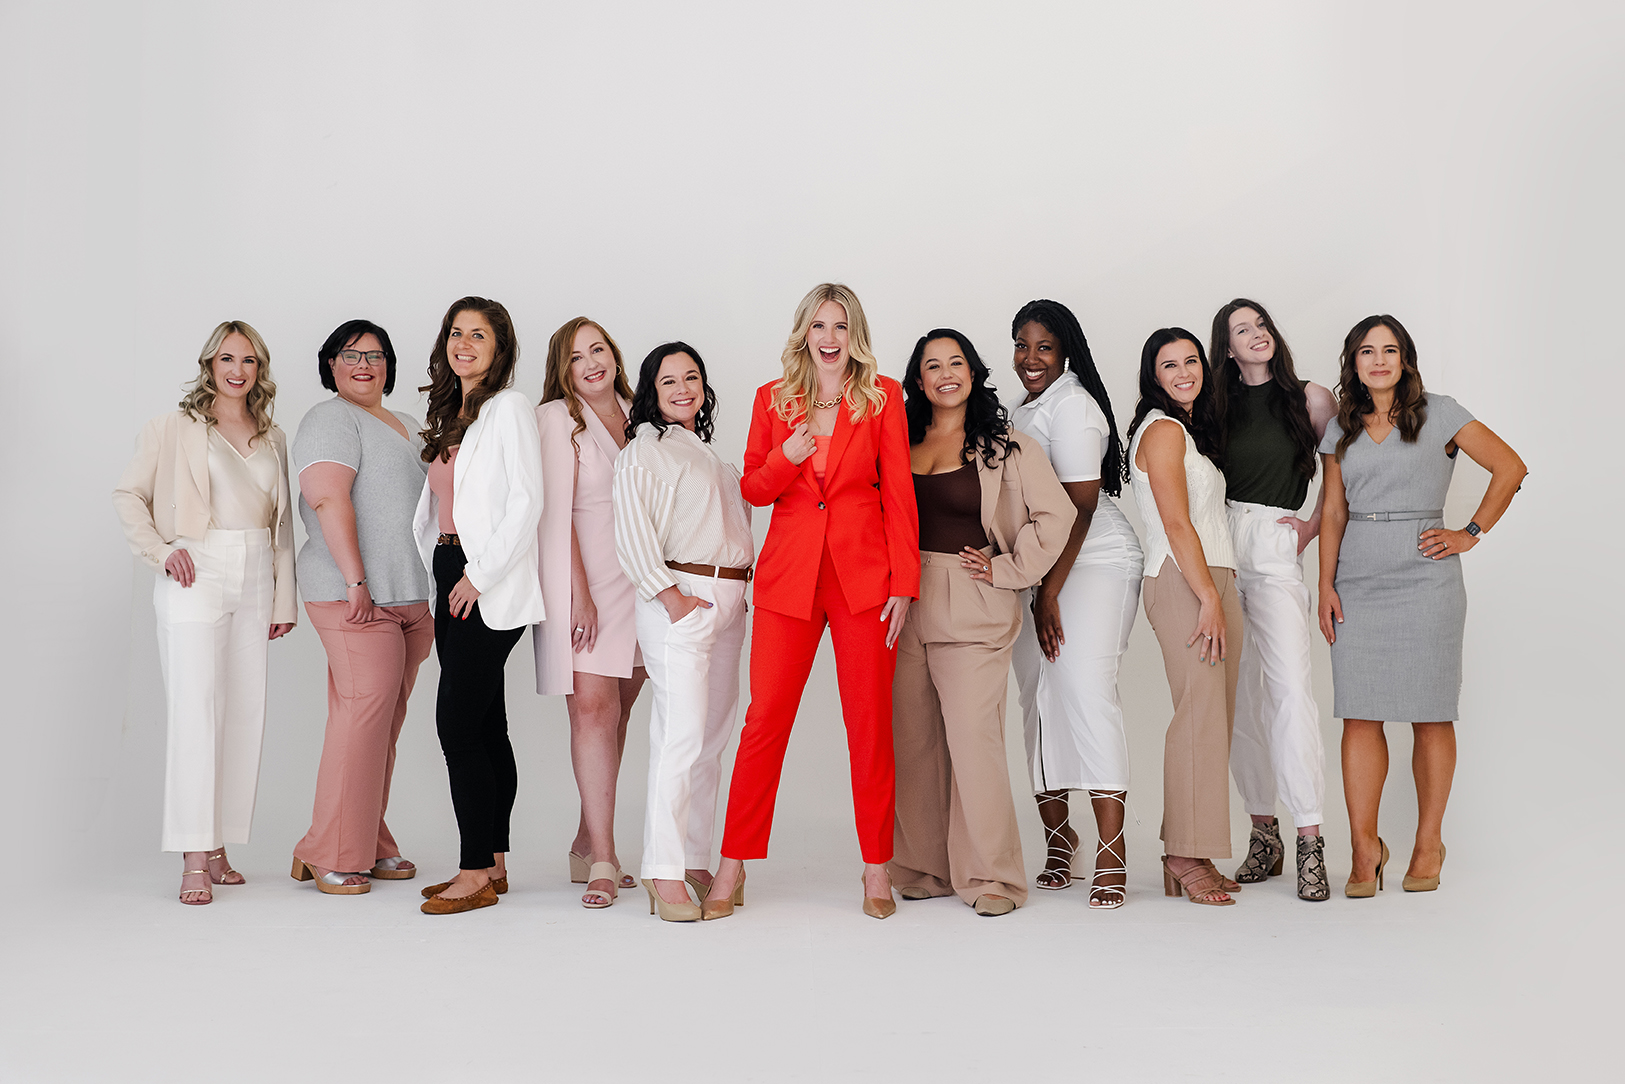 Women in business suits standing together proudly